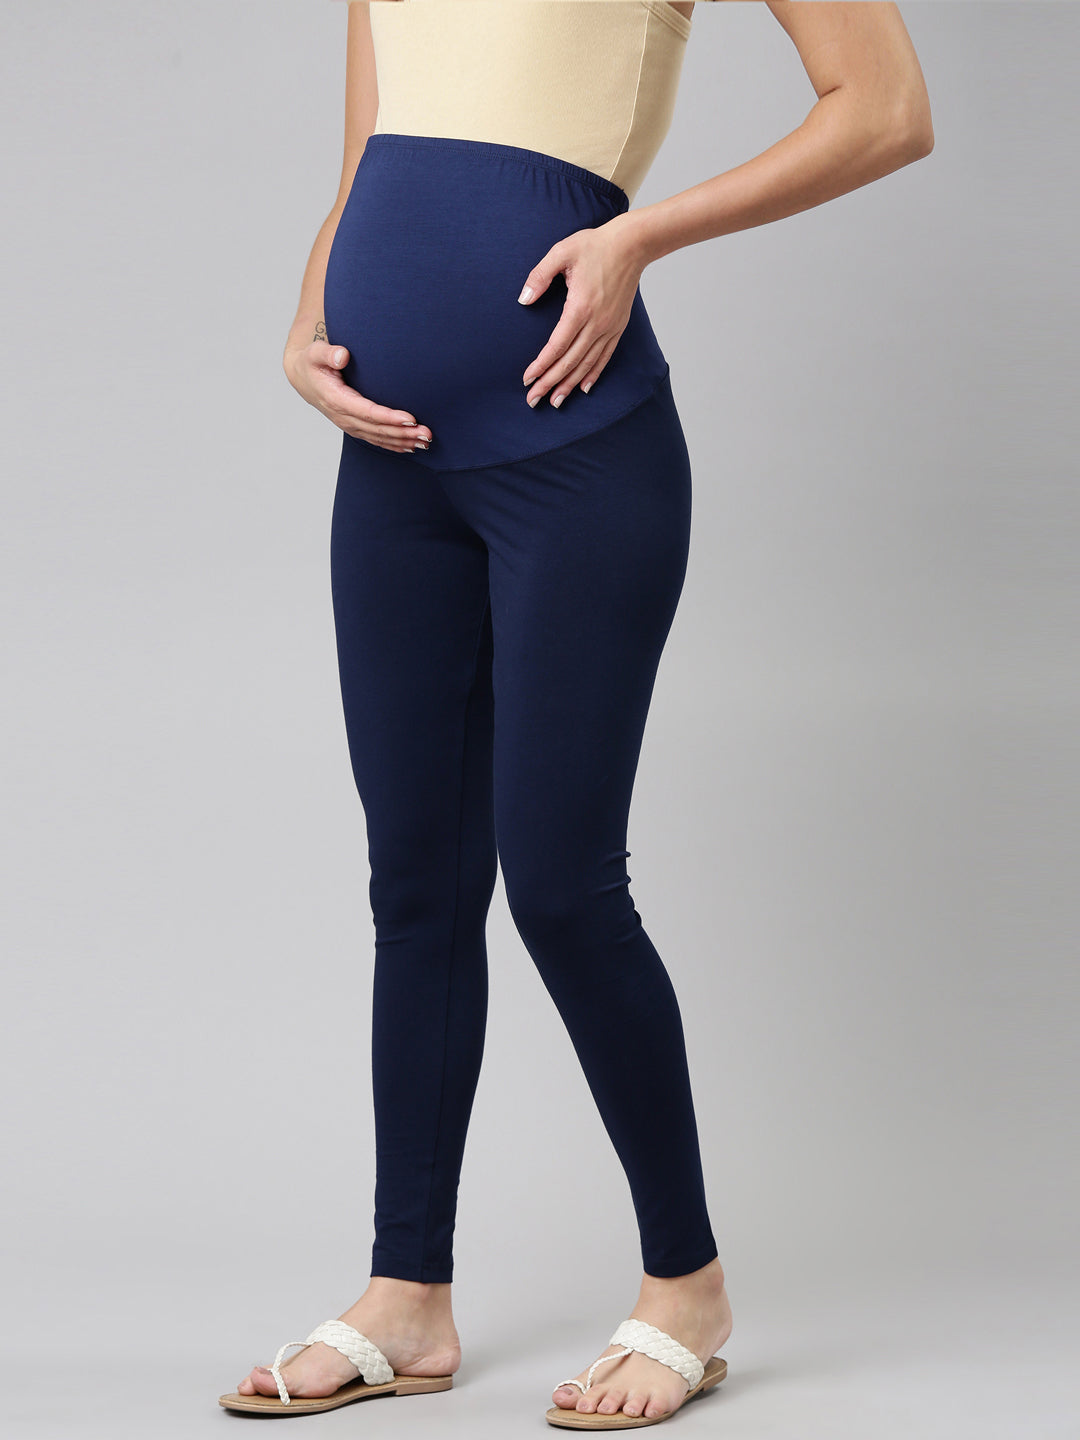 Maternity Leggings, Features: Super Soft And Comfortable